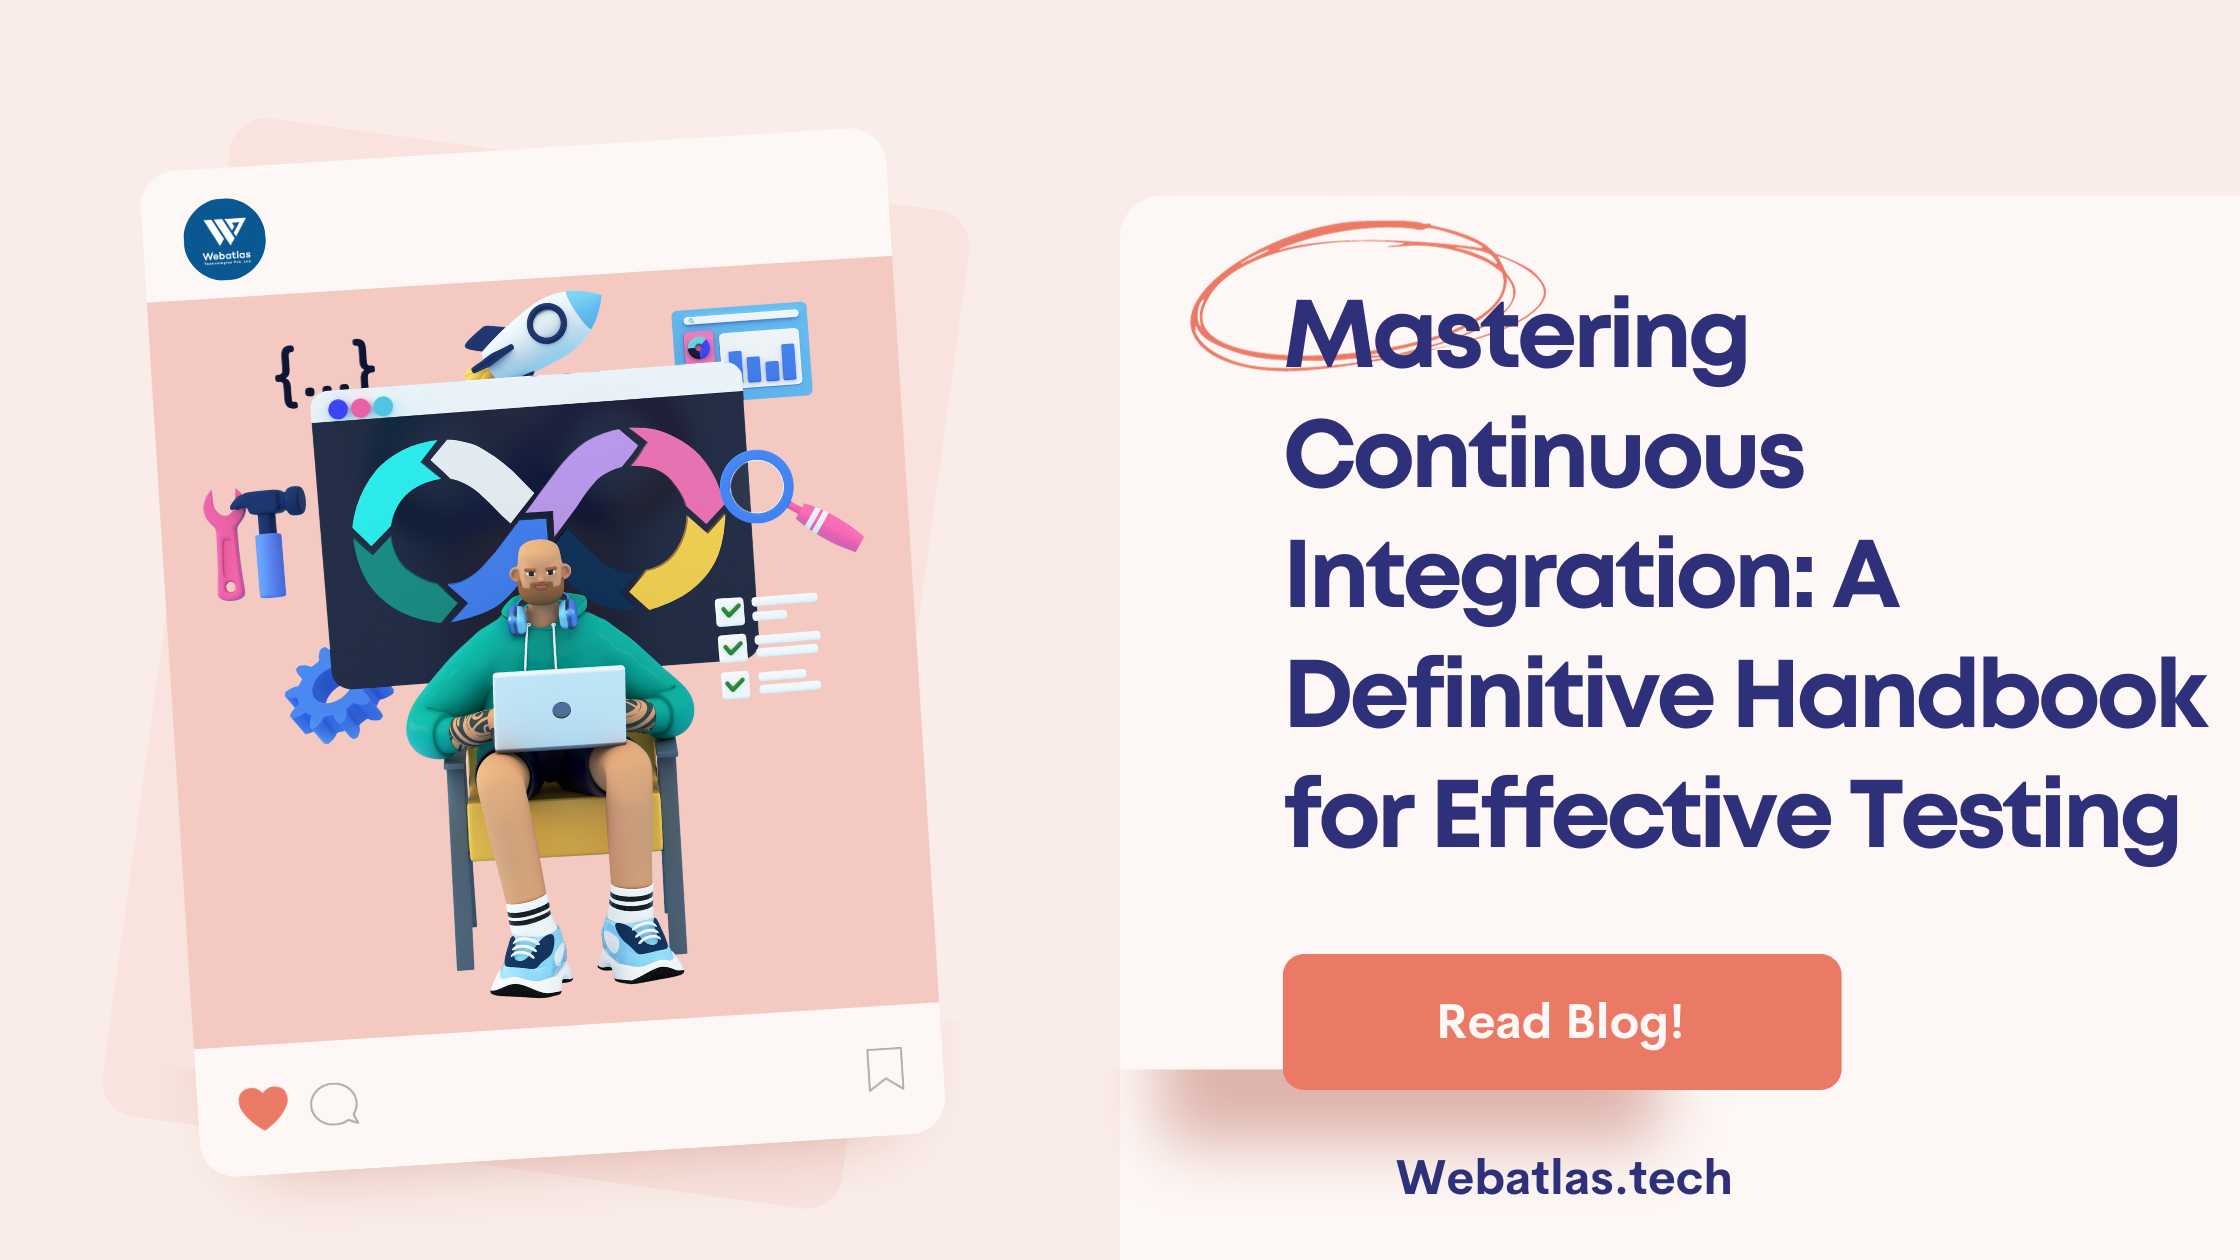 Implementing Continuous Integration for Effective Testing